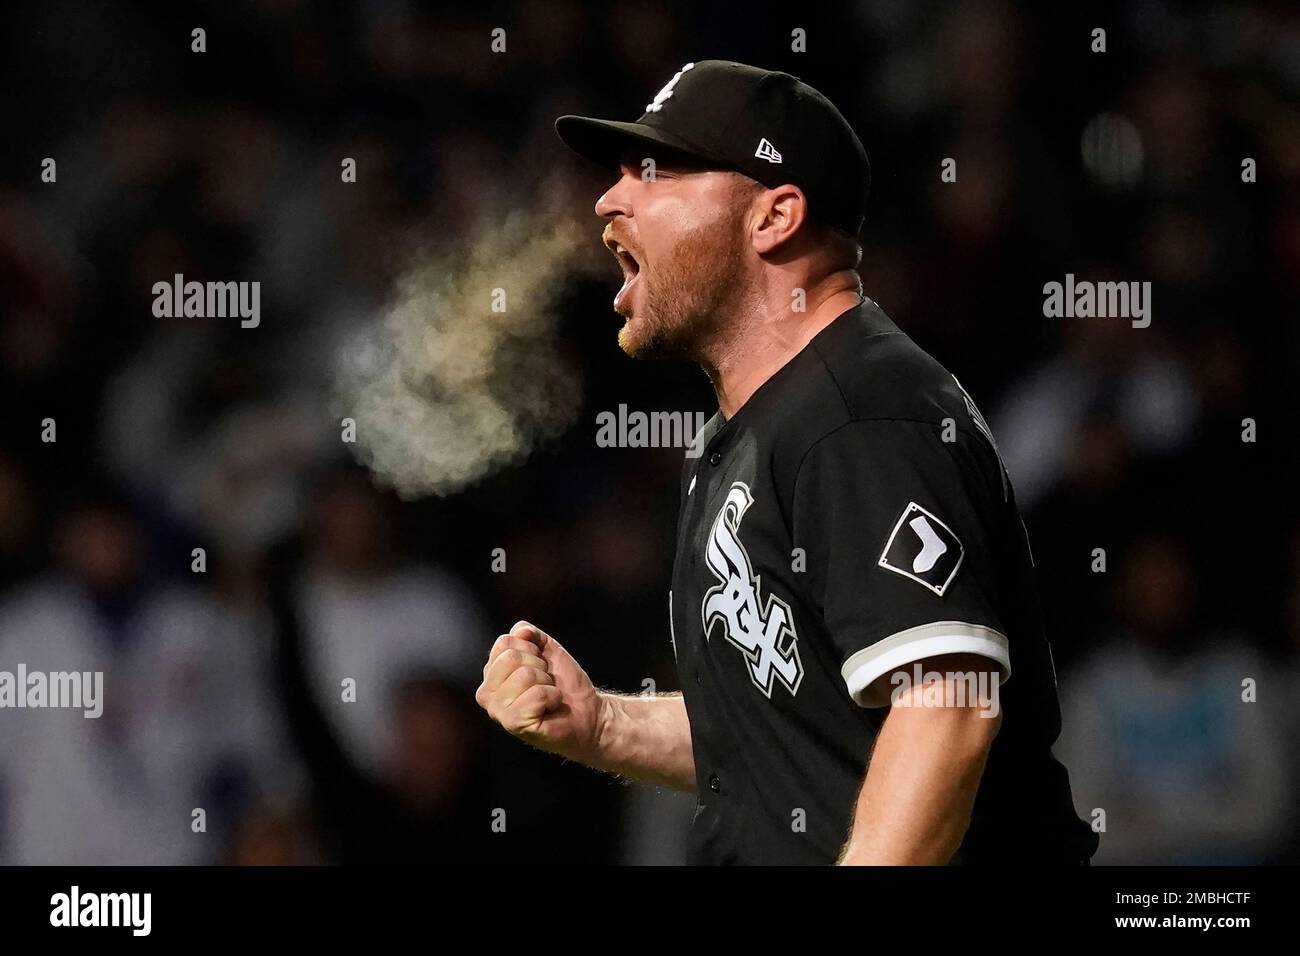 Chicago White Sox relief pitcher Liam Hendriks reacts after striking out  Chicago Cubs' Nico Hoerner to end a baseball game Wednesday, May 4, 2022,  in Chicago. The White Sox won 4-3. (AP